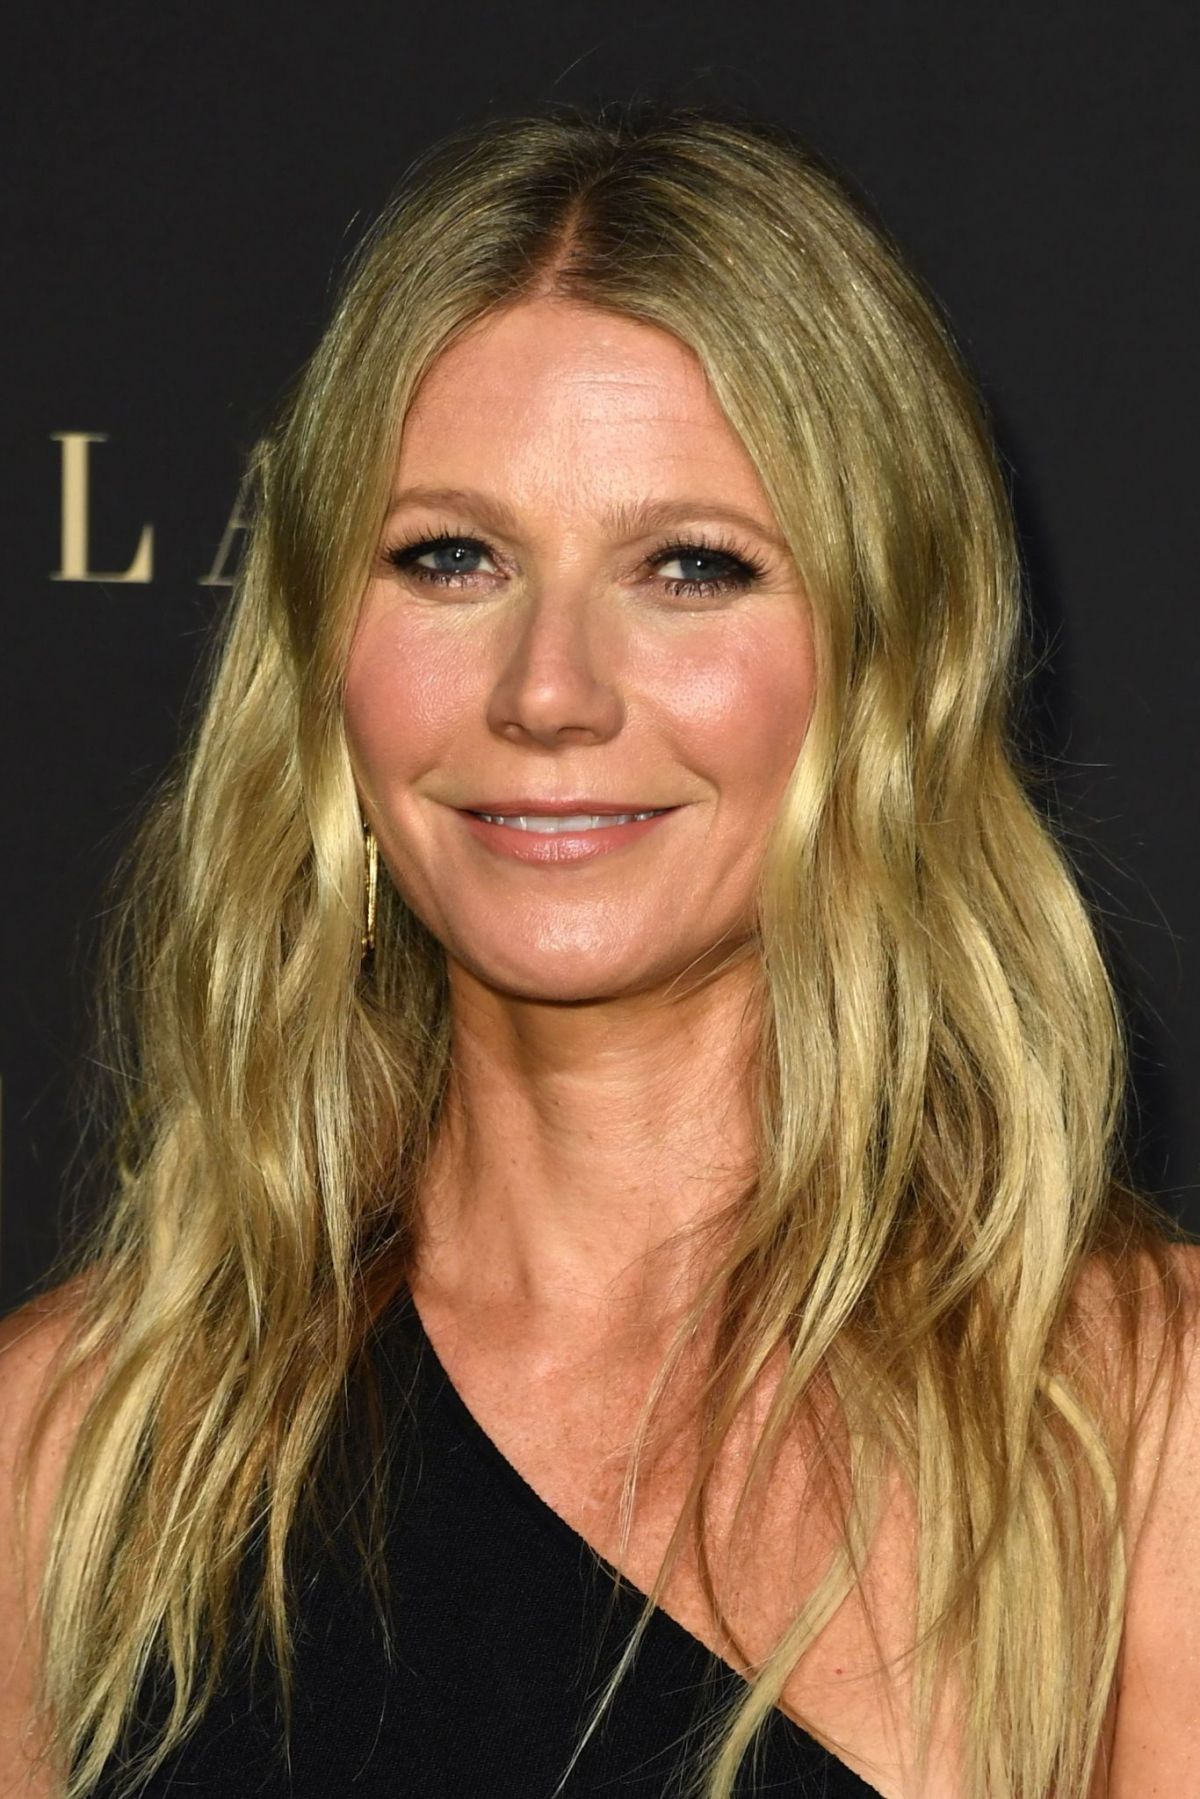 GWYNETH PALTROW at Celebration of an Icon Global Event in 